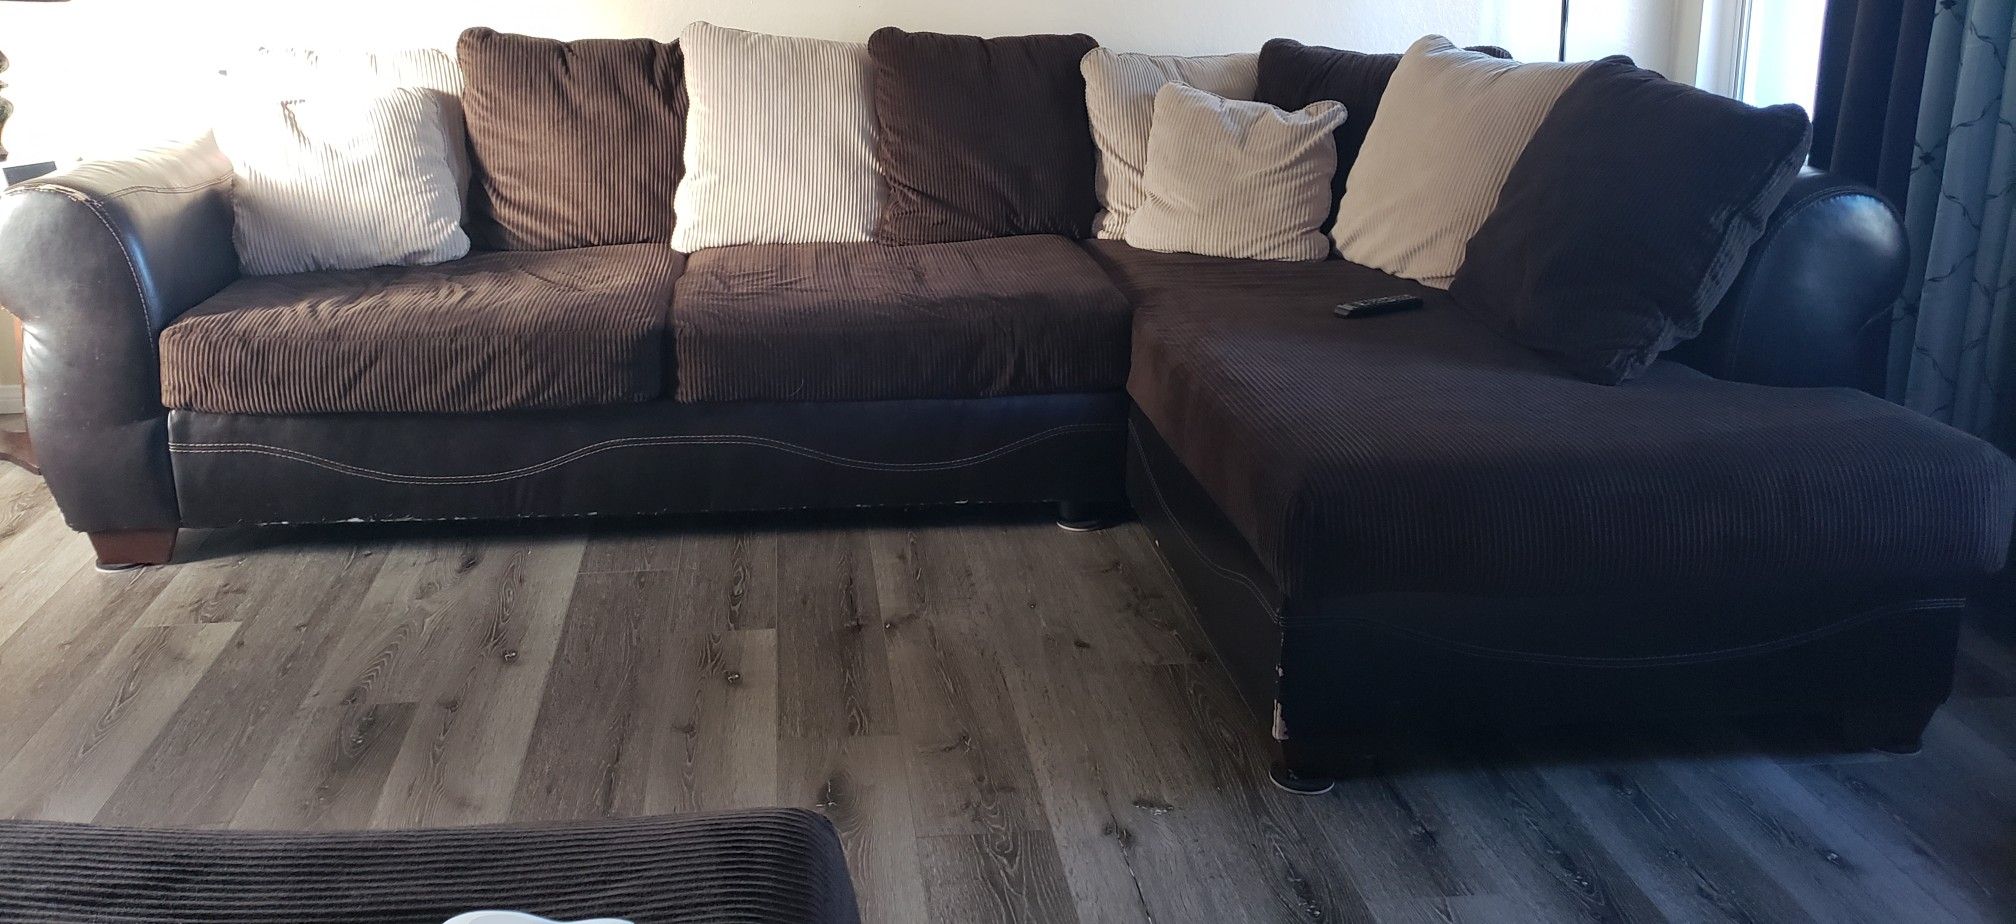 Couches for sale,